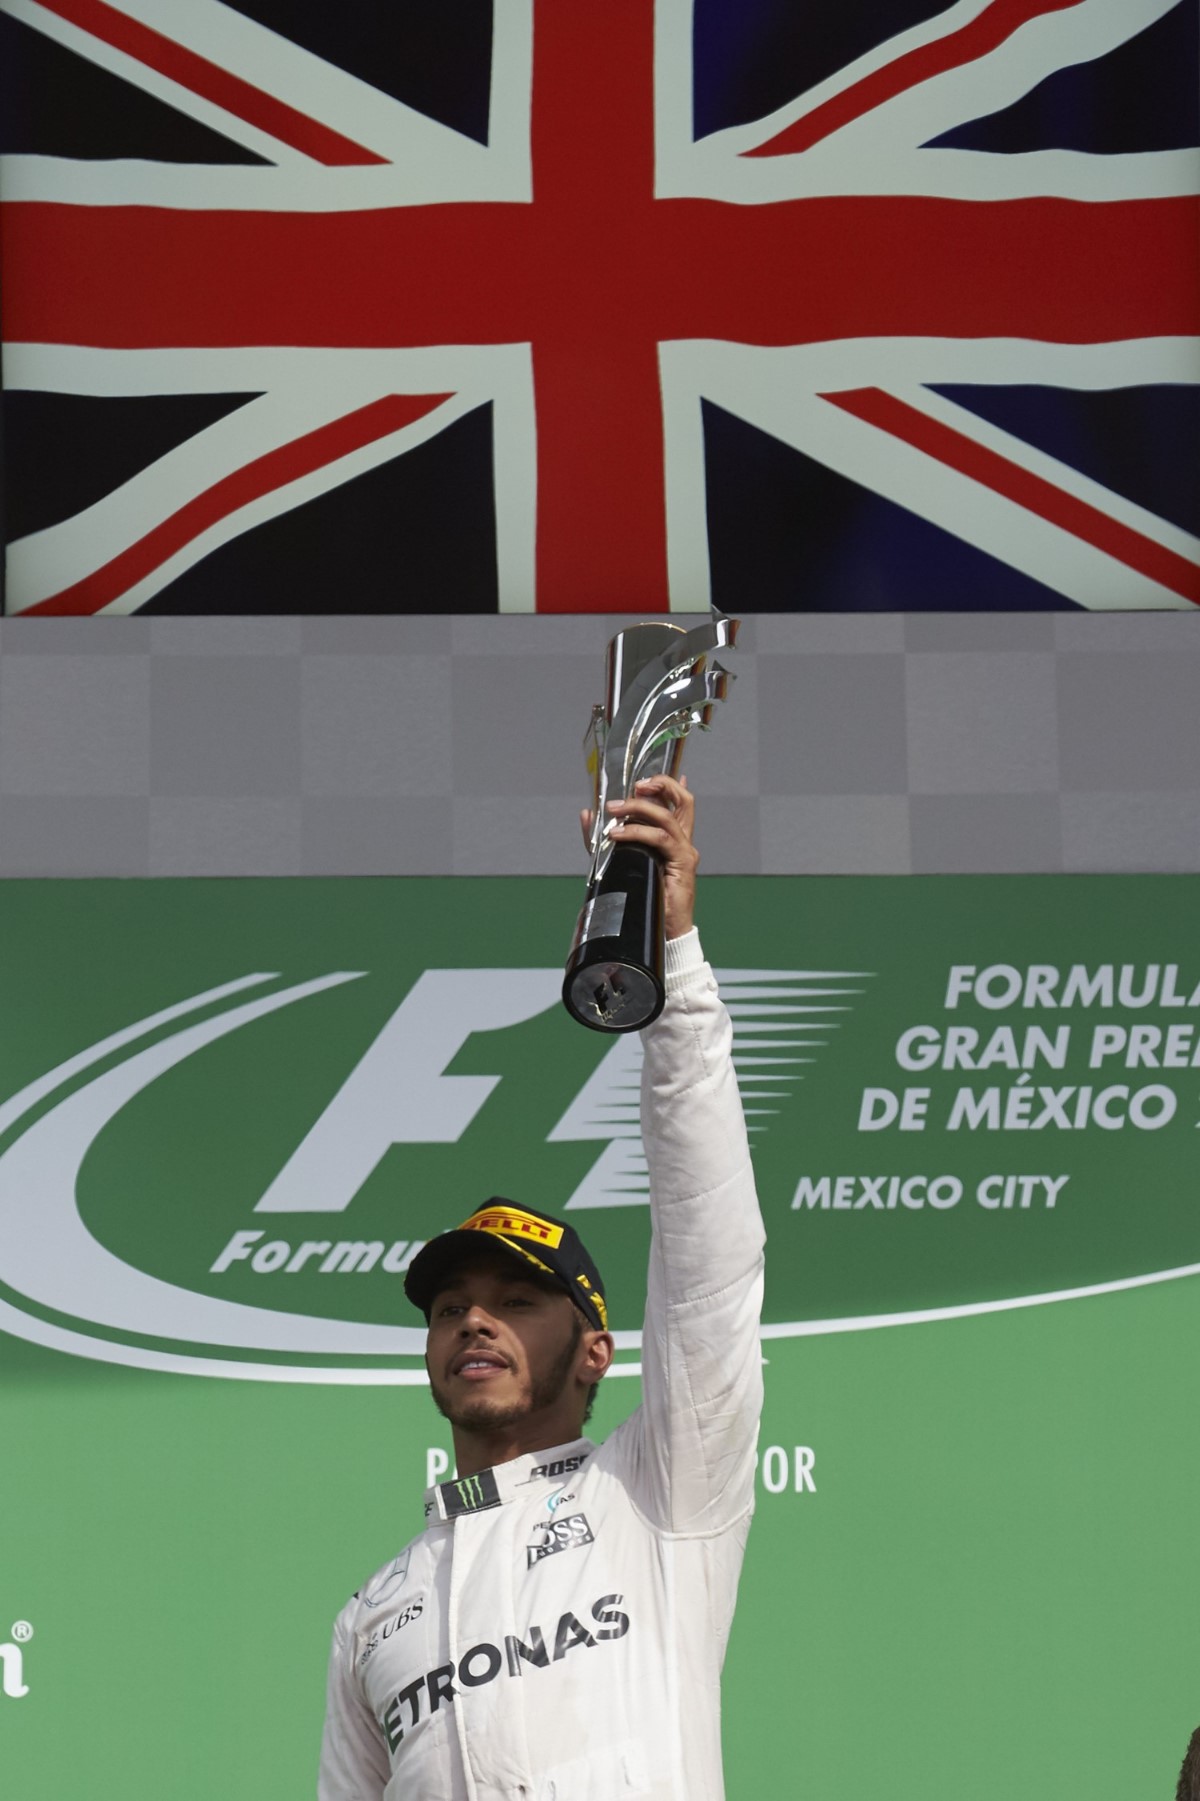 Hamilton will win in Mexico and wrap up his 4th title